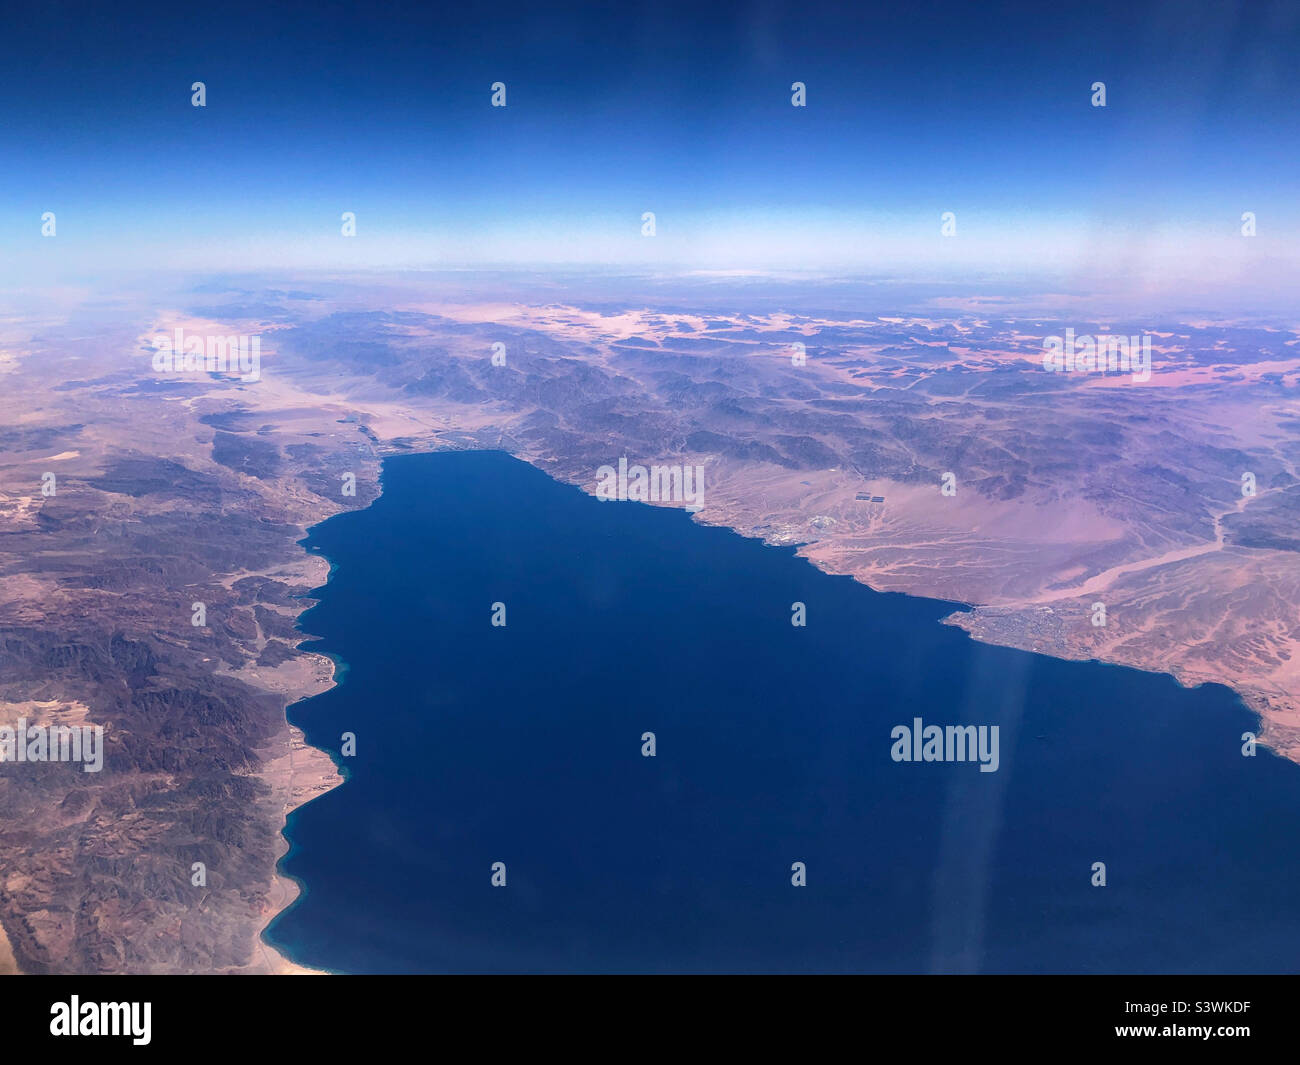 The Gulf of Aqaba (Gulf of Eilat ) from the air showing the South Sinai in Egypt to the left and Jordan and Saudi Arabia on the right. Stock Photo